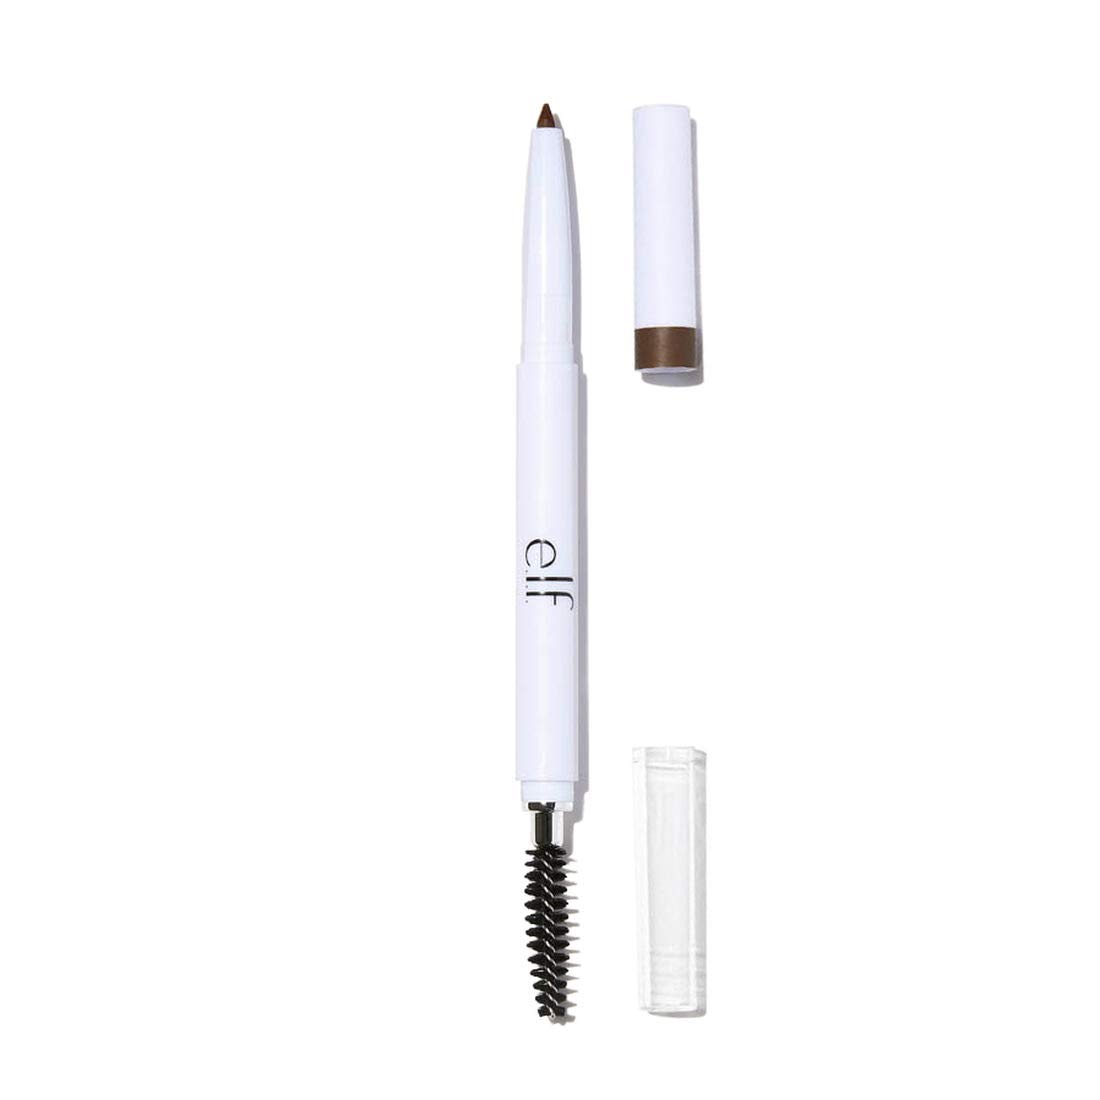 e.l.f. Instant Lift Brow Pencil (Blonde, Deep Brown, or Auburn) $1.50 + Free Shipping w/ Amazon Prime or Orders $25+